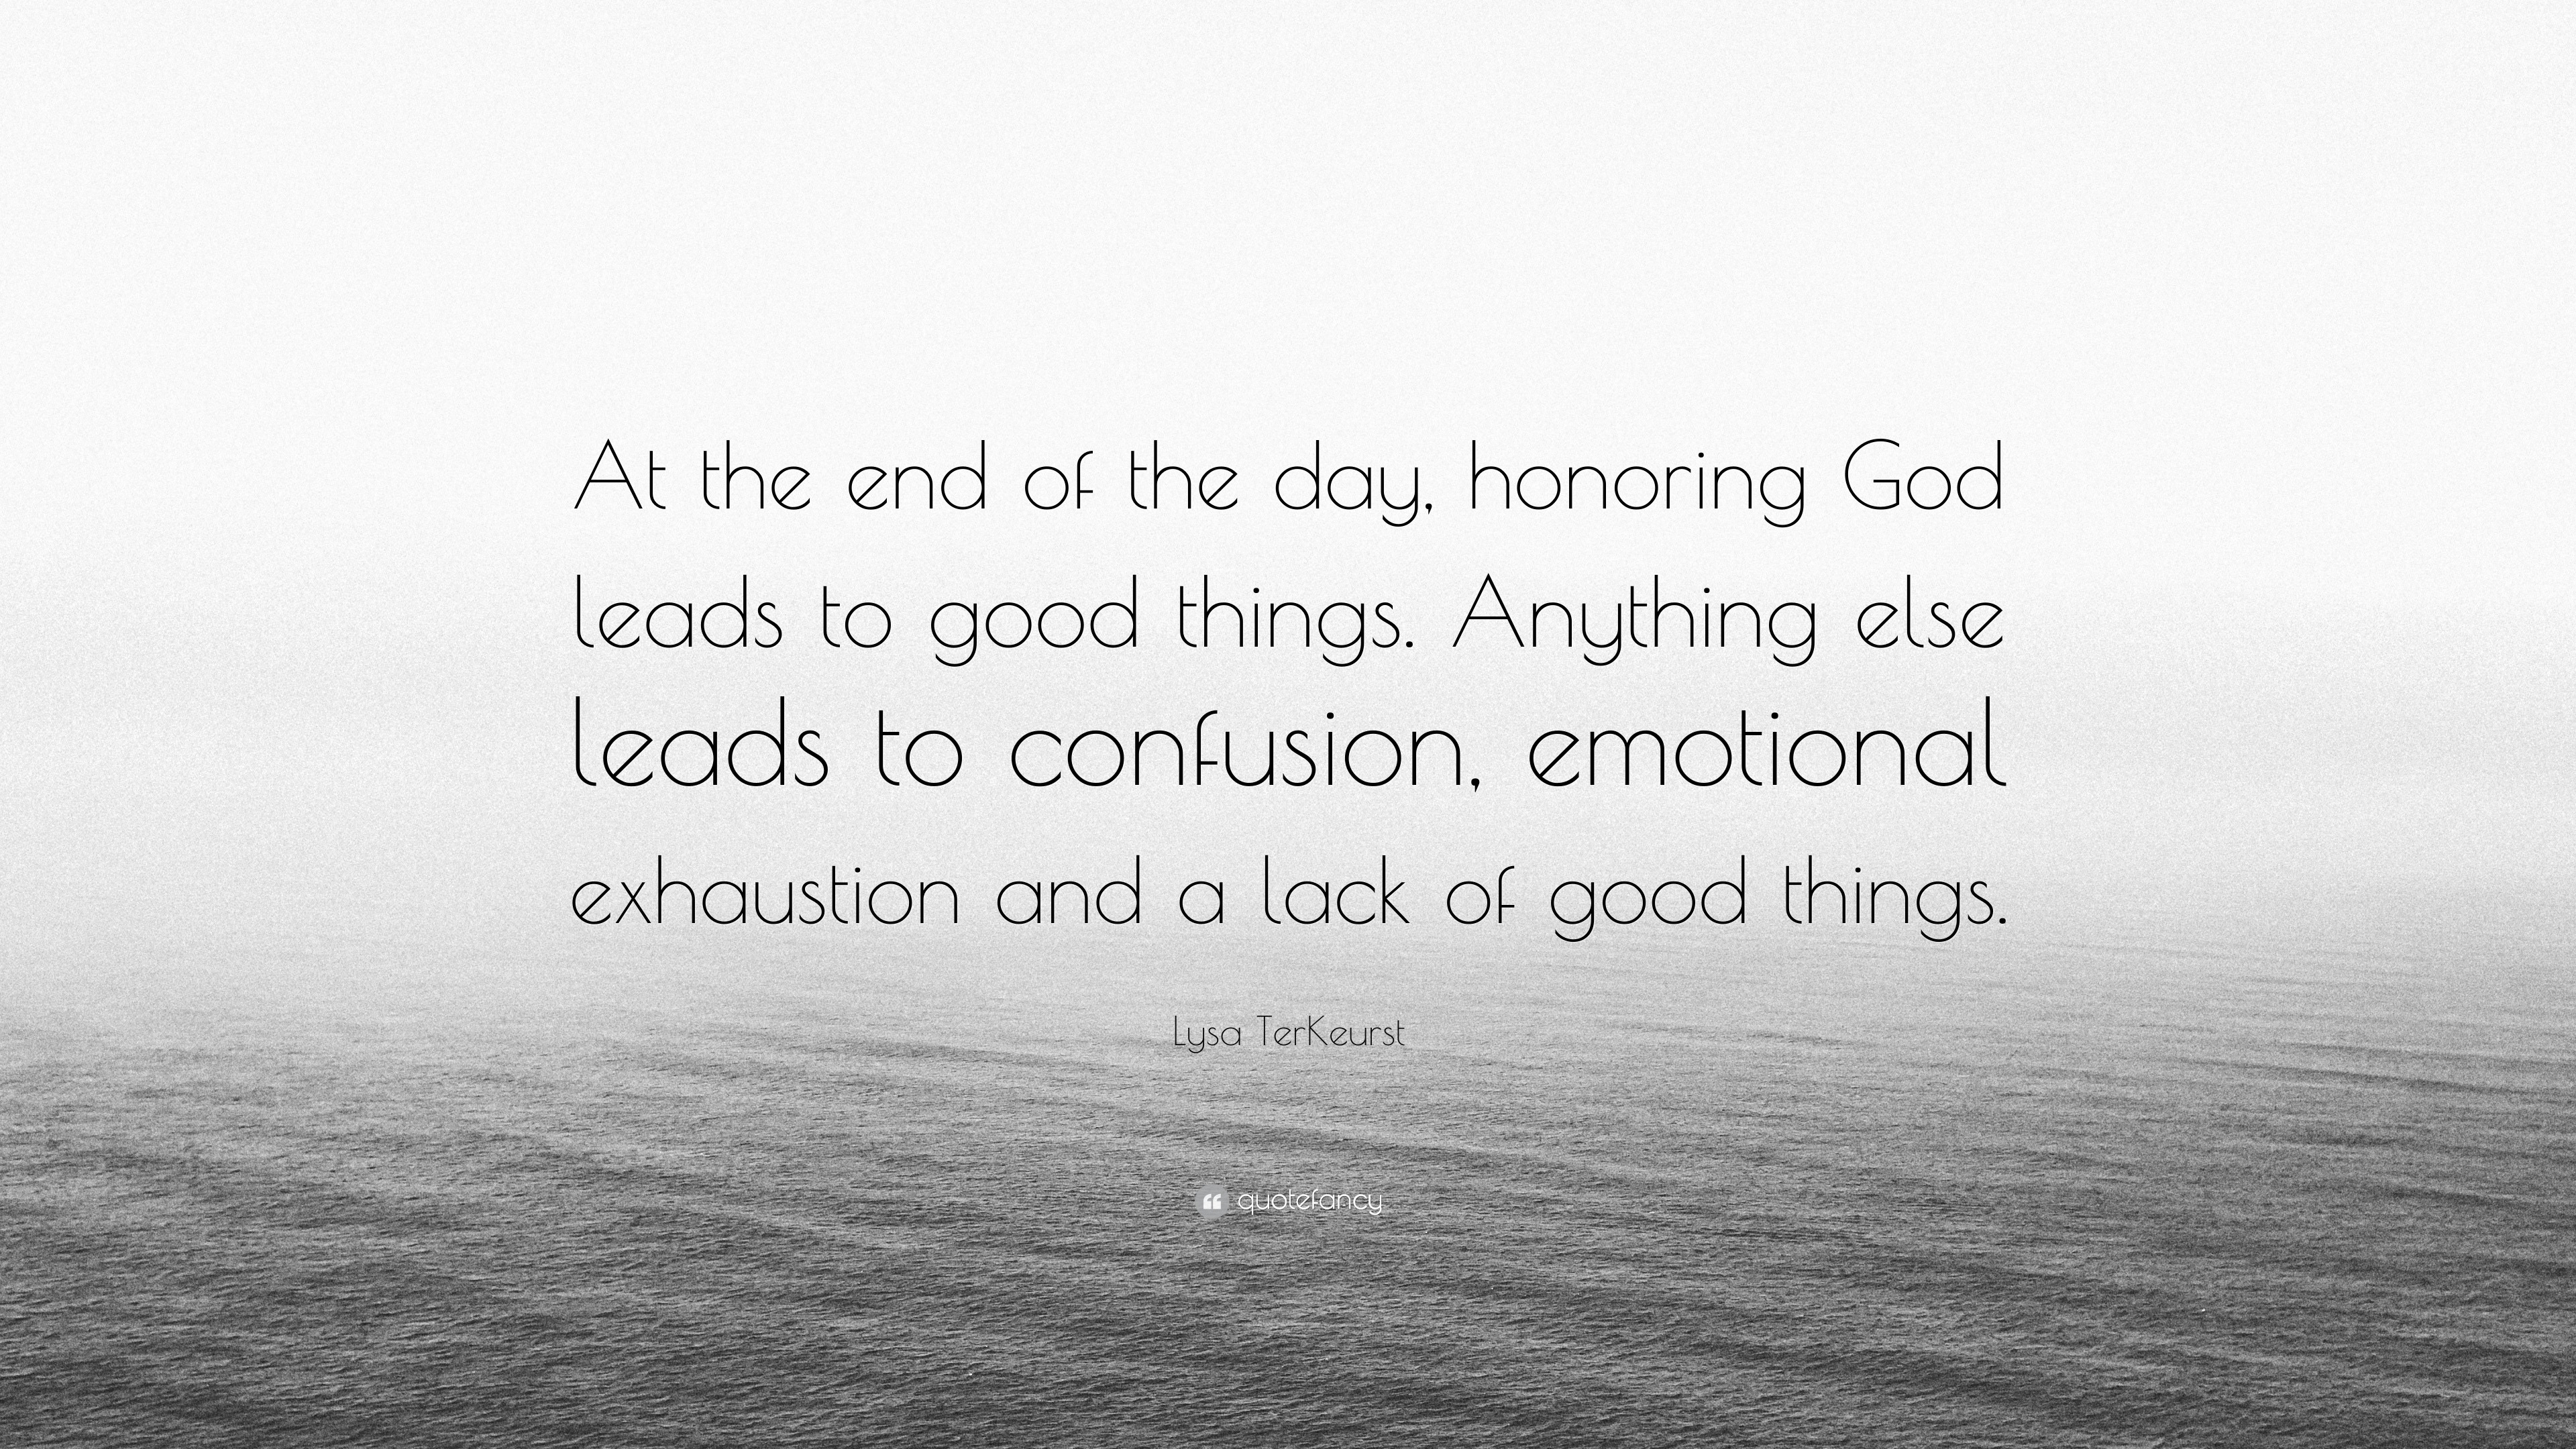 Lysa TerKeurst Quote “At the end of the day, honoring God